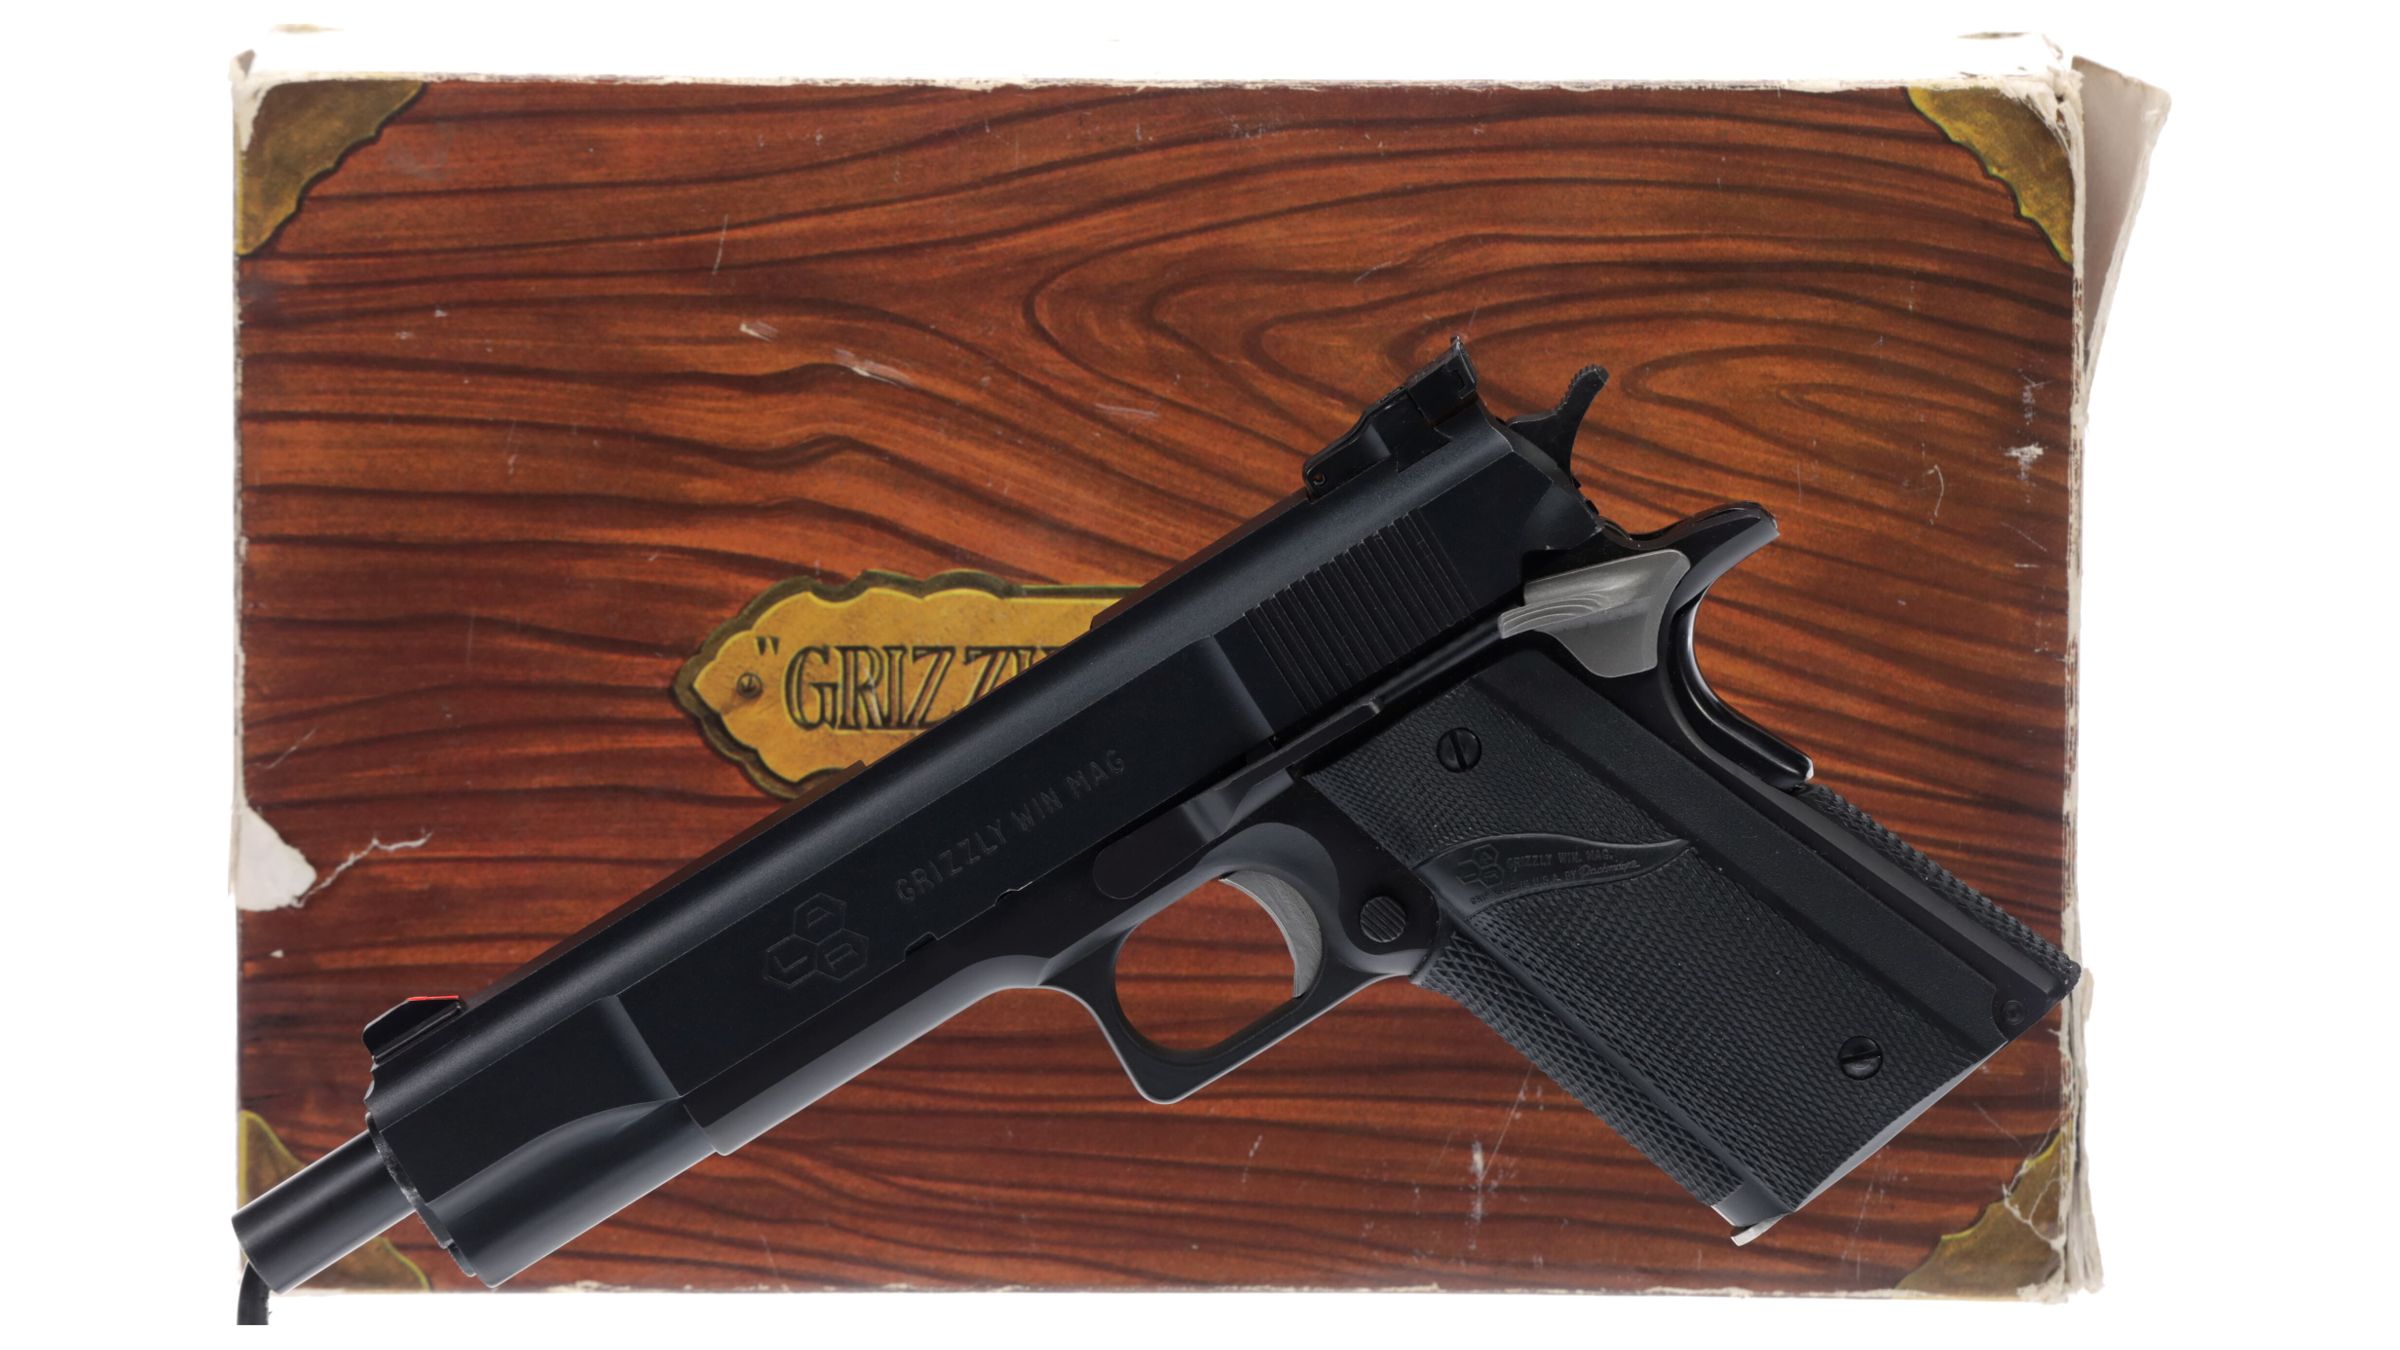 LAR Manufacturing Grizzly Win Mag Mark II Pistol with Box | Rock Island